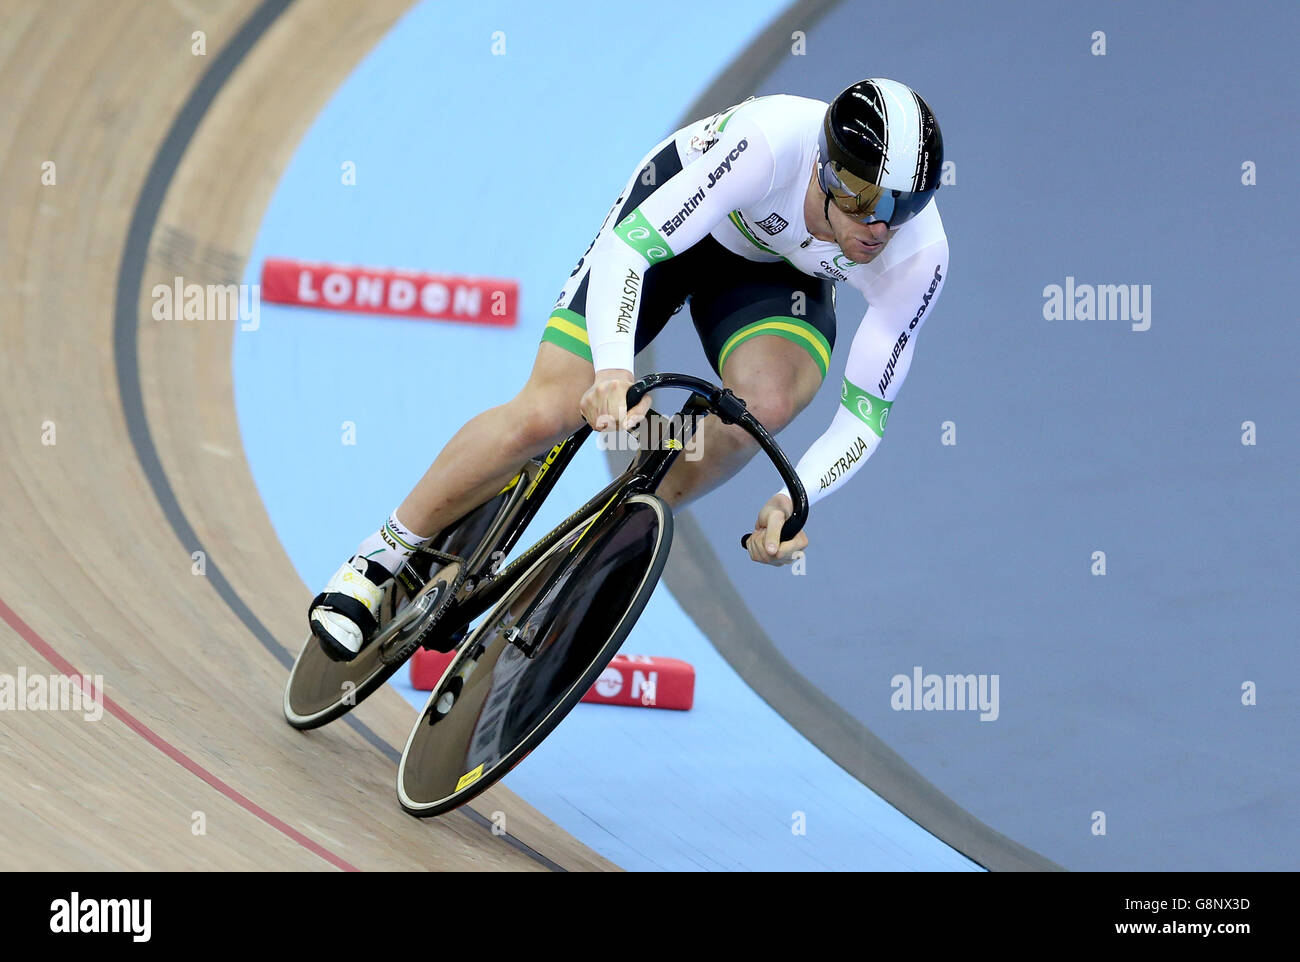 Australia's Jacob Schmid competes in the Men's Sprint during day three of the UCI Track Cycling World Championships at Lee Valley VeloPark, London. PRESS ASSOCIATION Photo. Picture date: Friday March 4, 2016. See PA story CYCLING World. Photo credit should read: Tim Goode/PA Wire. Stock Photo